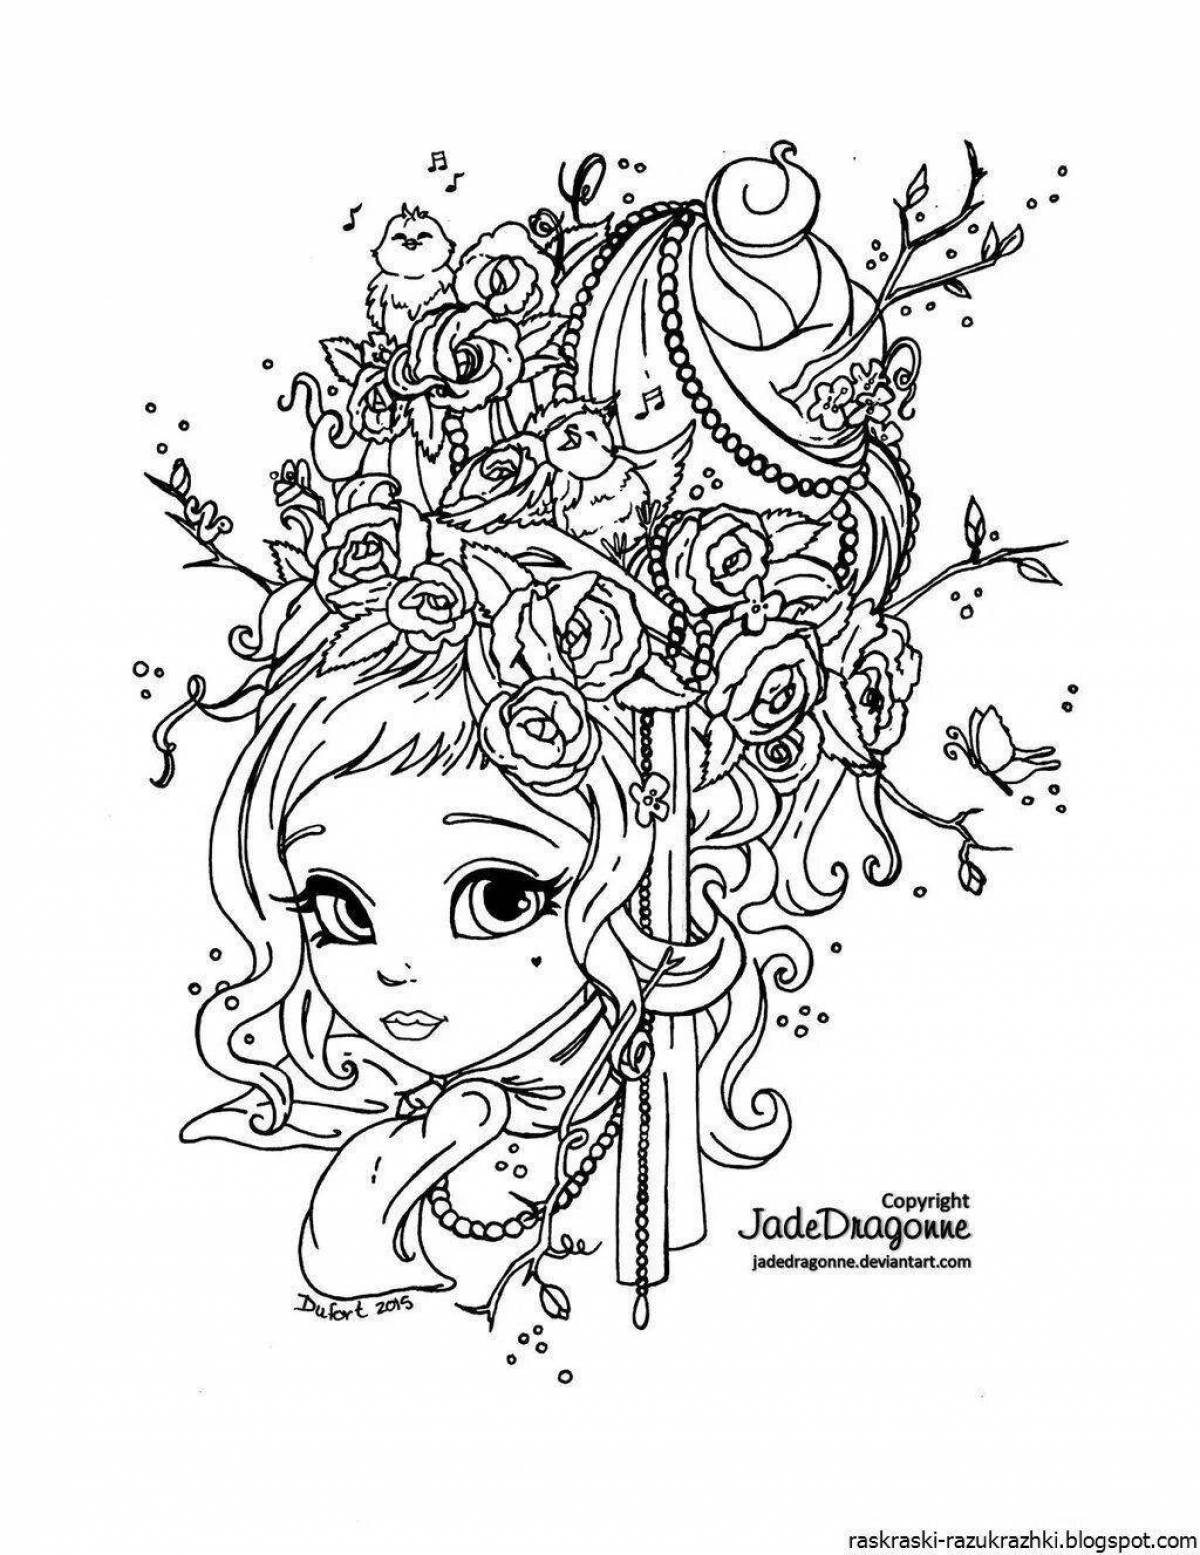 Cute anti-stress coloring book for girls 9-10 years old